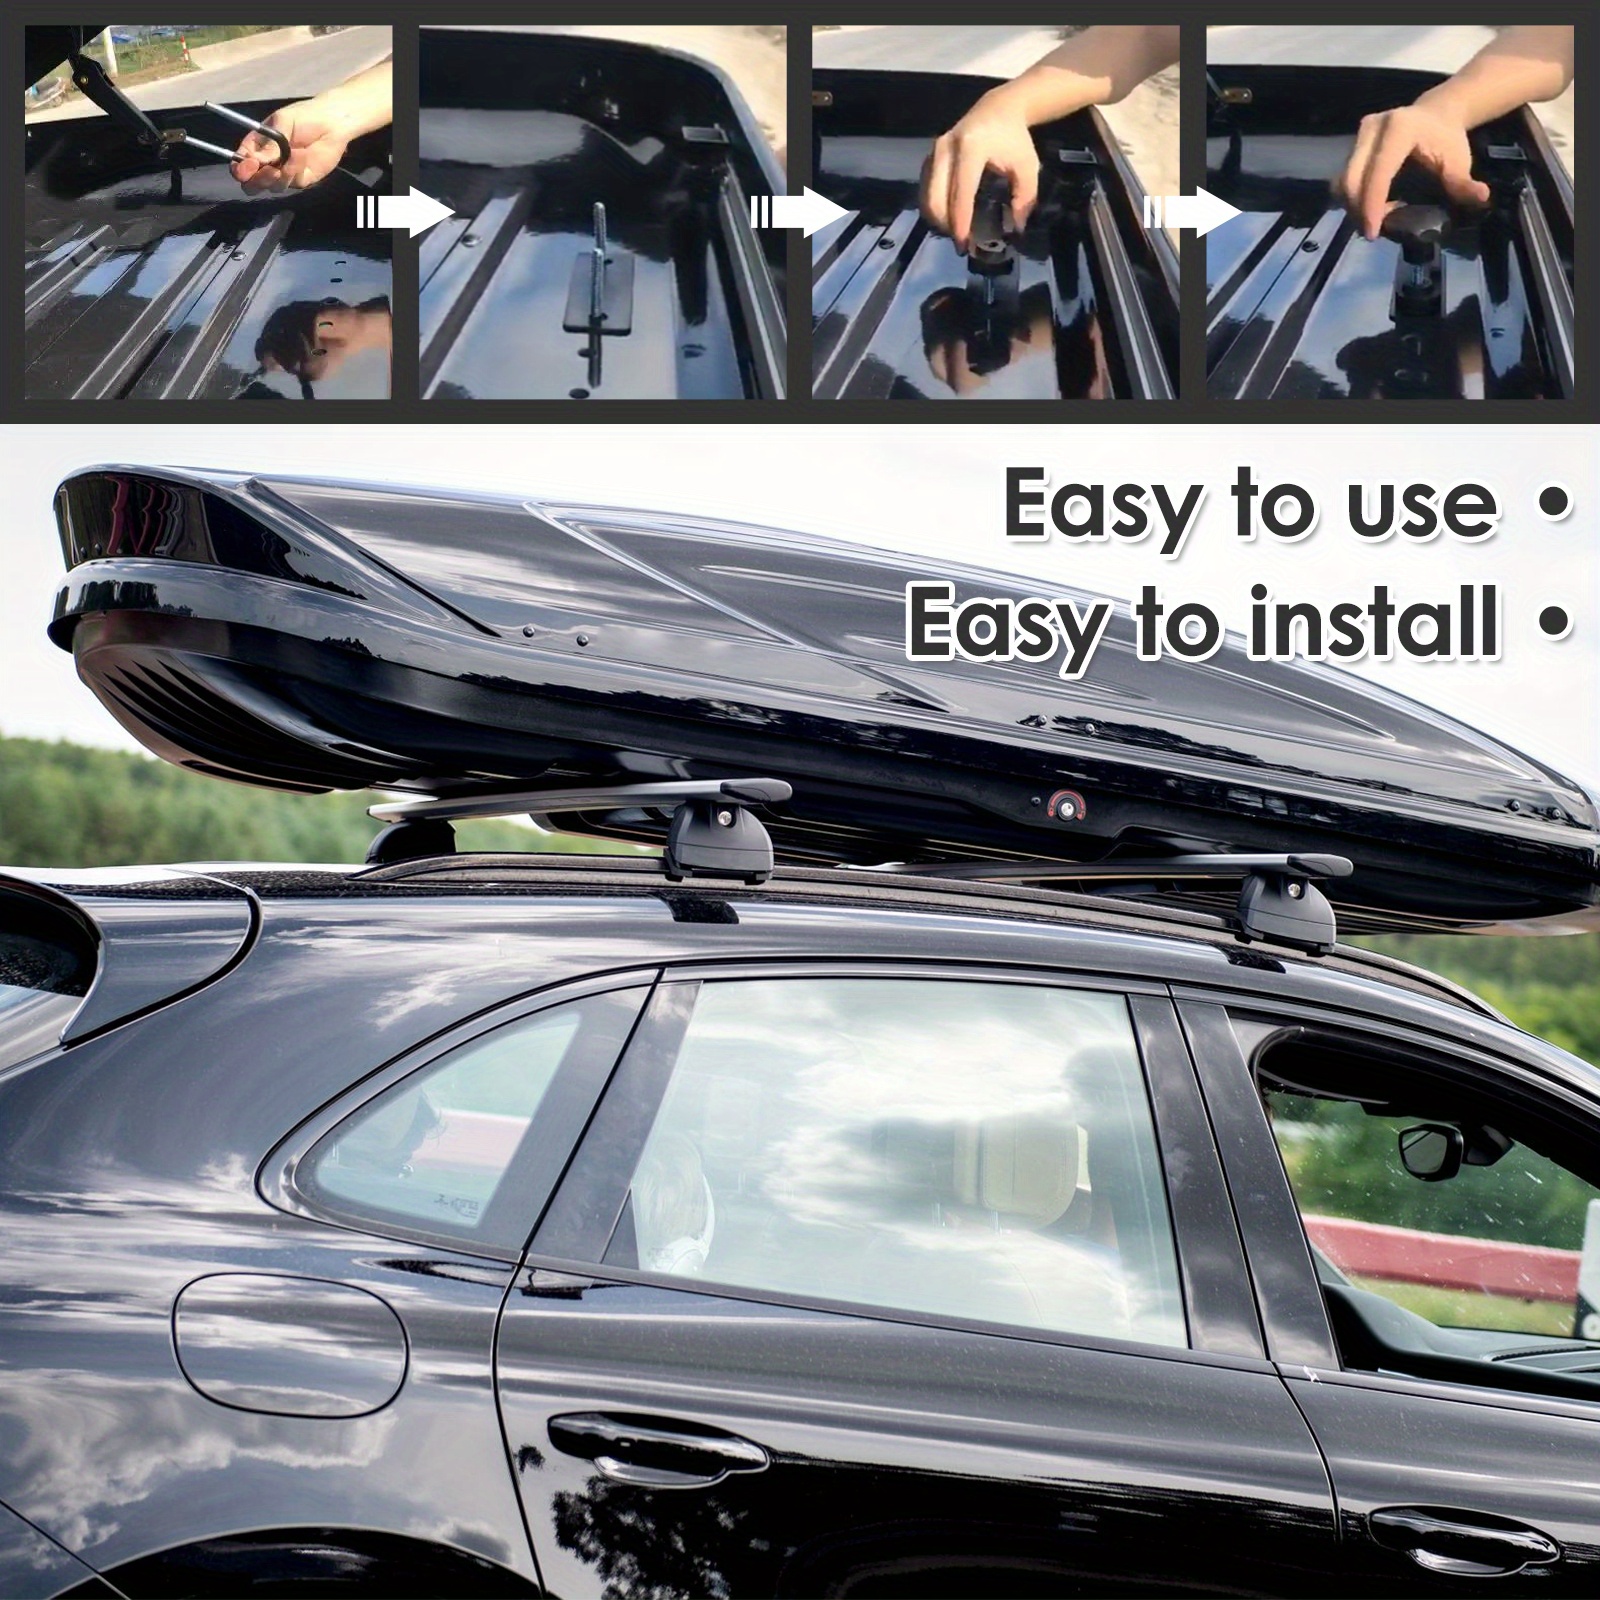 Summerkimy 4pcs Roof Box Mounting U Bracket Universal Roof Box U-Bolt Clamps Easy to Install Car Van Mounting Fitting Kit with 8 Heavy Duty Lock Nuts 2 Straps